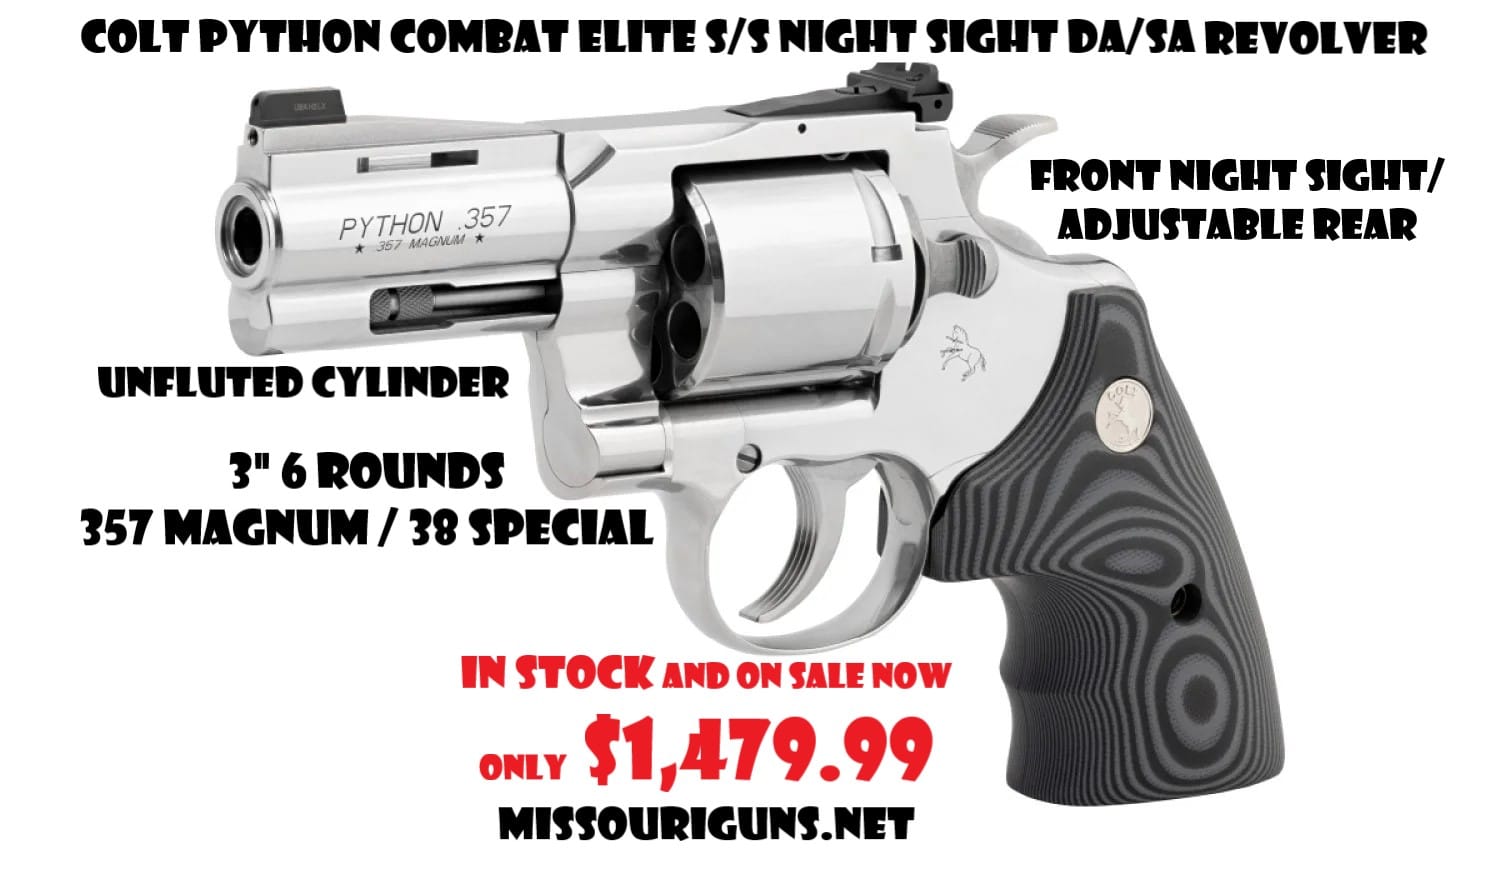 Colt PCE PYTHON-SP3NS UPC: 098289003393 IN STOCK $1,479.99